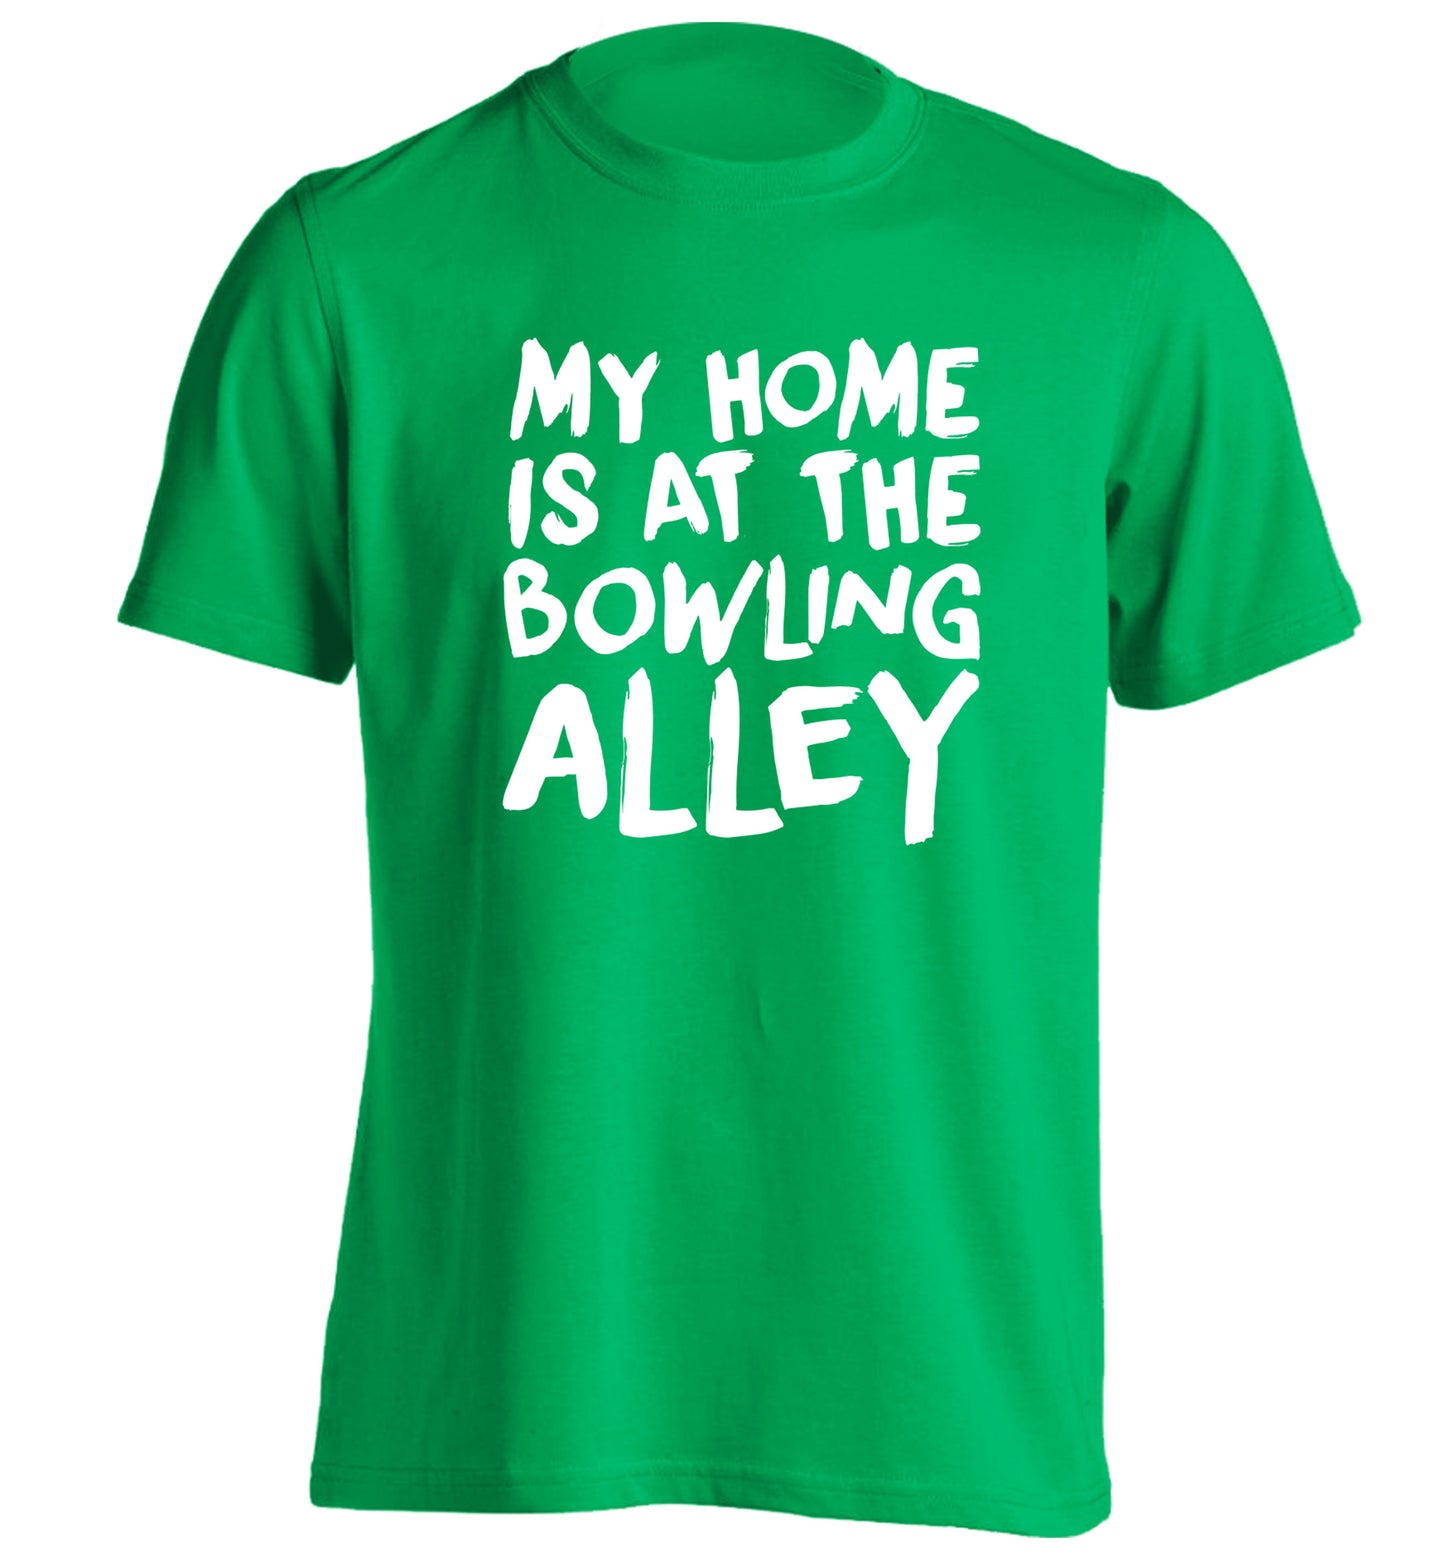 My home is at the bowling alley adults unisex green Tshirt 2XL